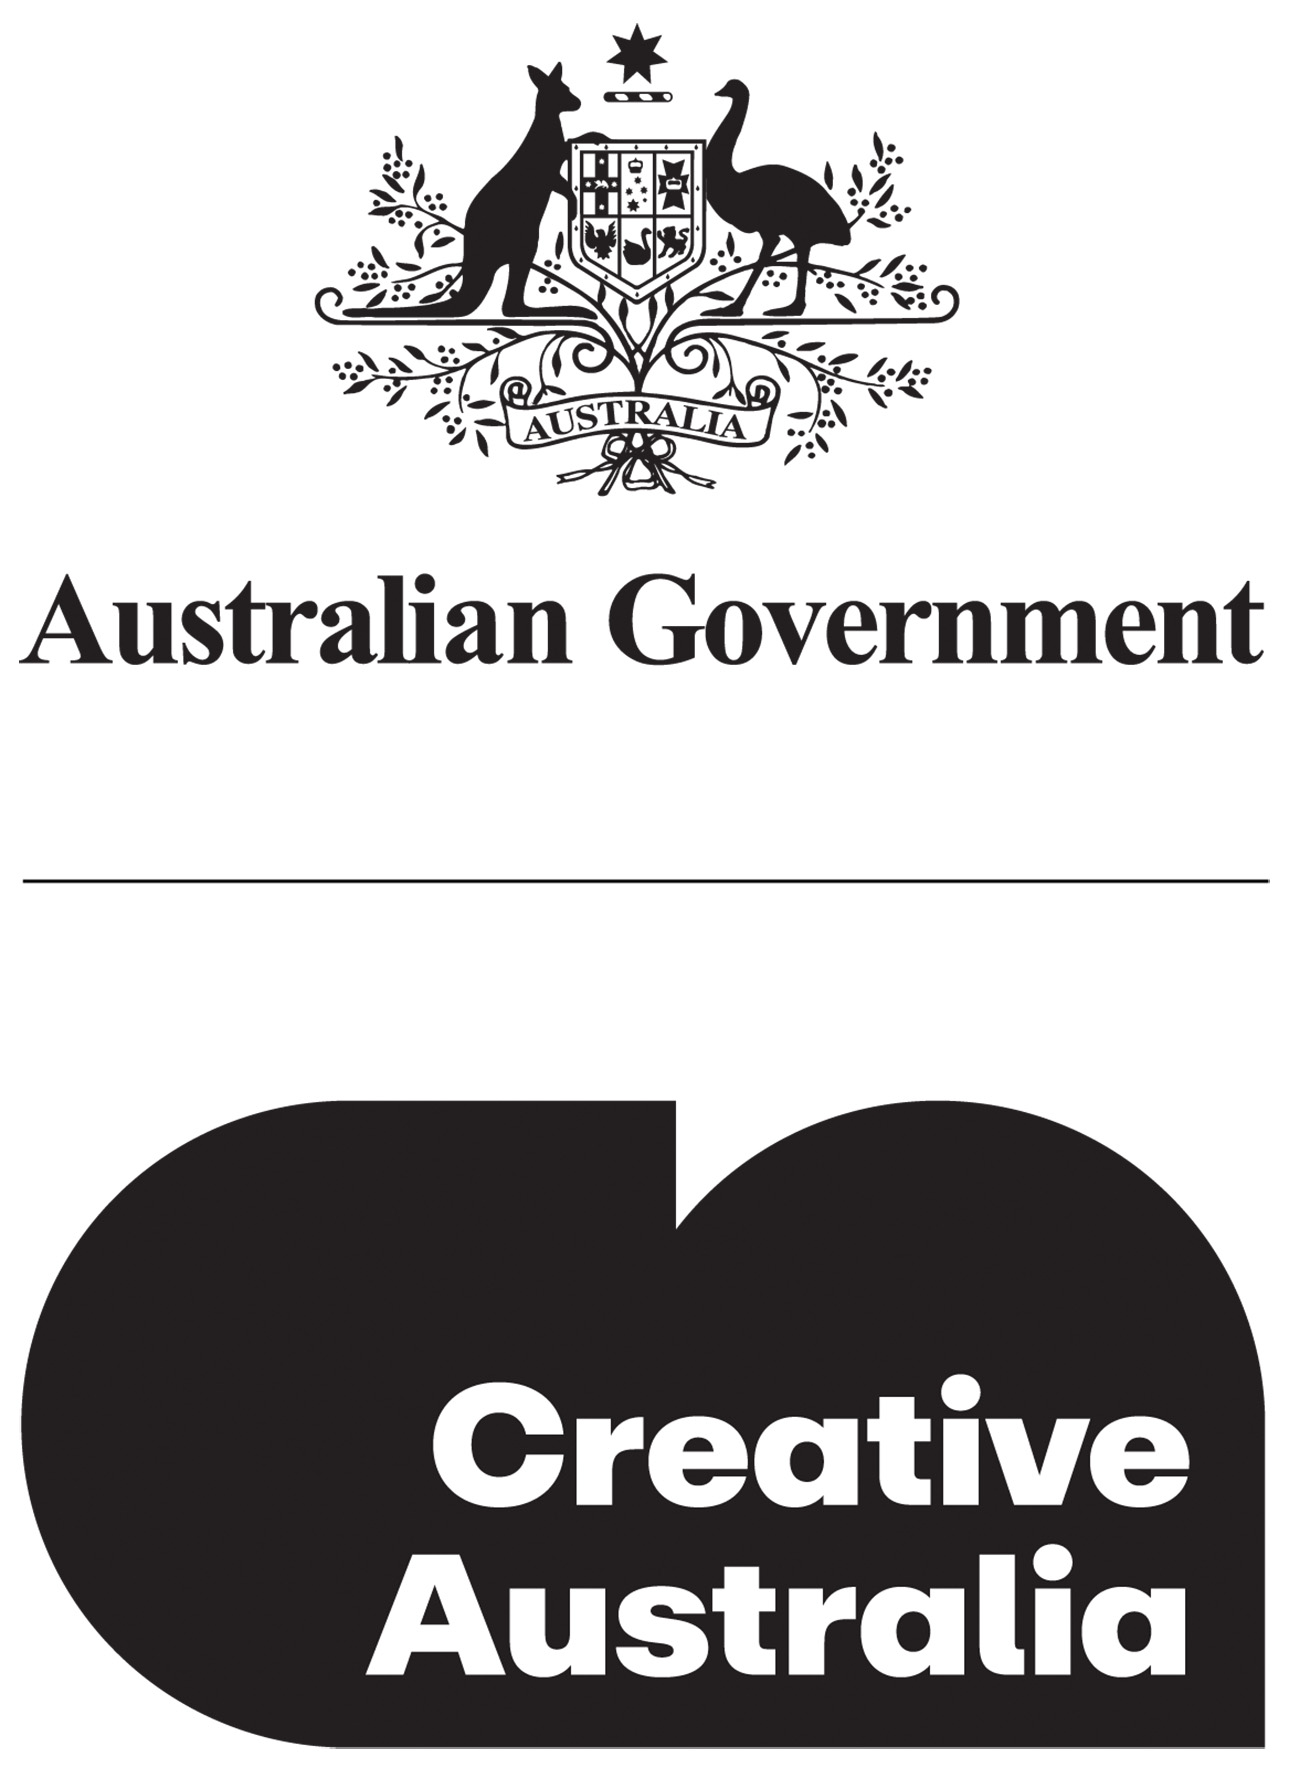 Australian Government and Creative Australia logos in black on a white background